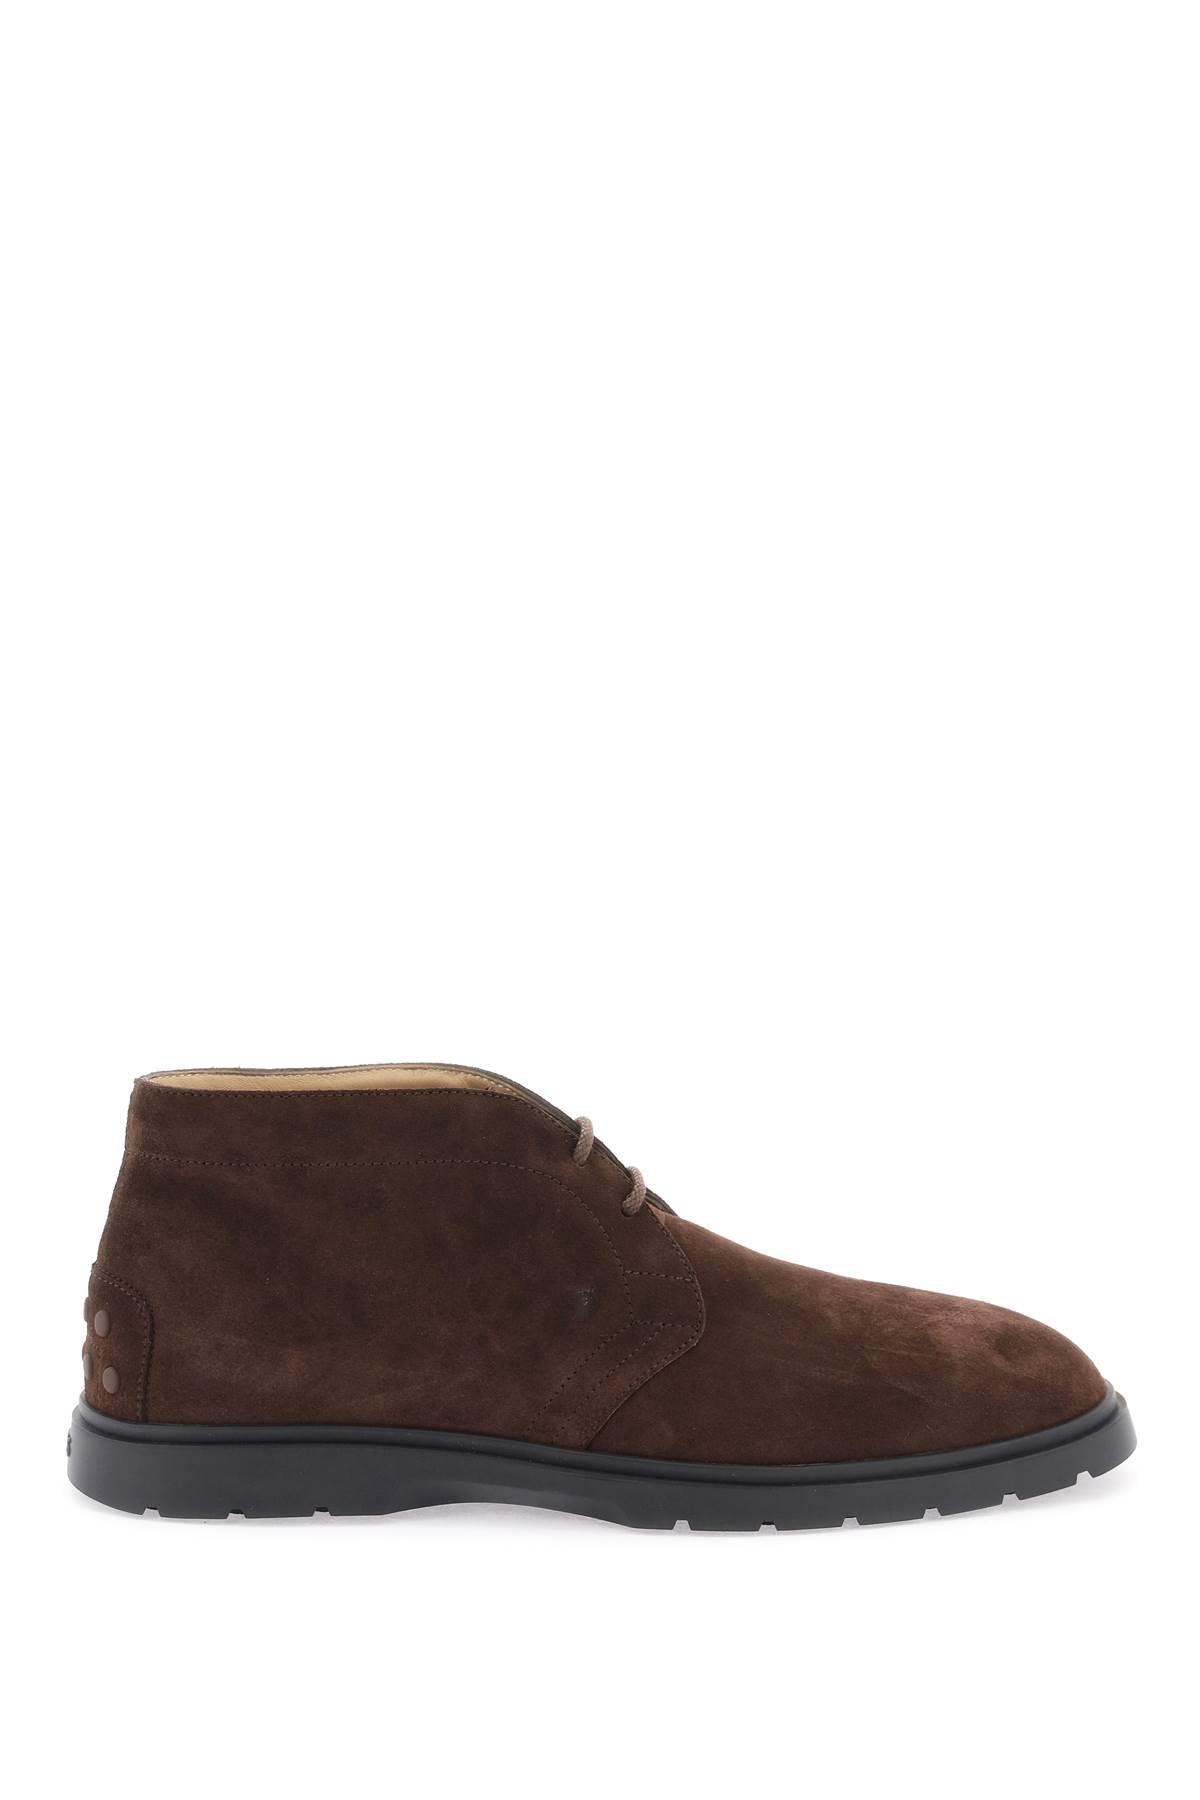 Tod'S Suede Leather Ankle Boots-Tod'S-Urbanheer